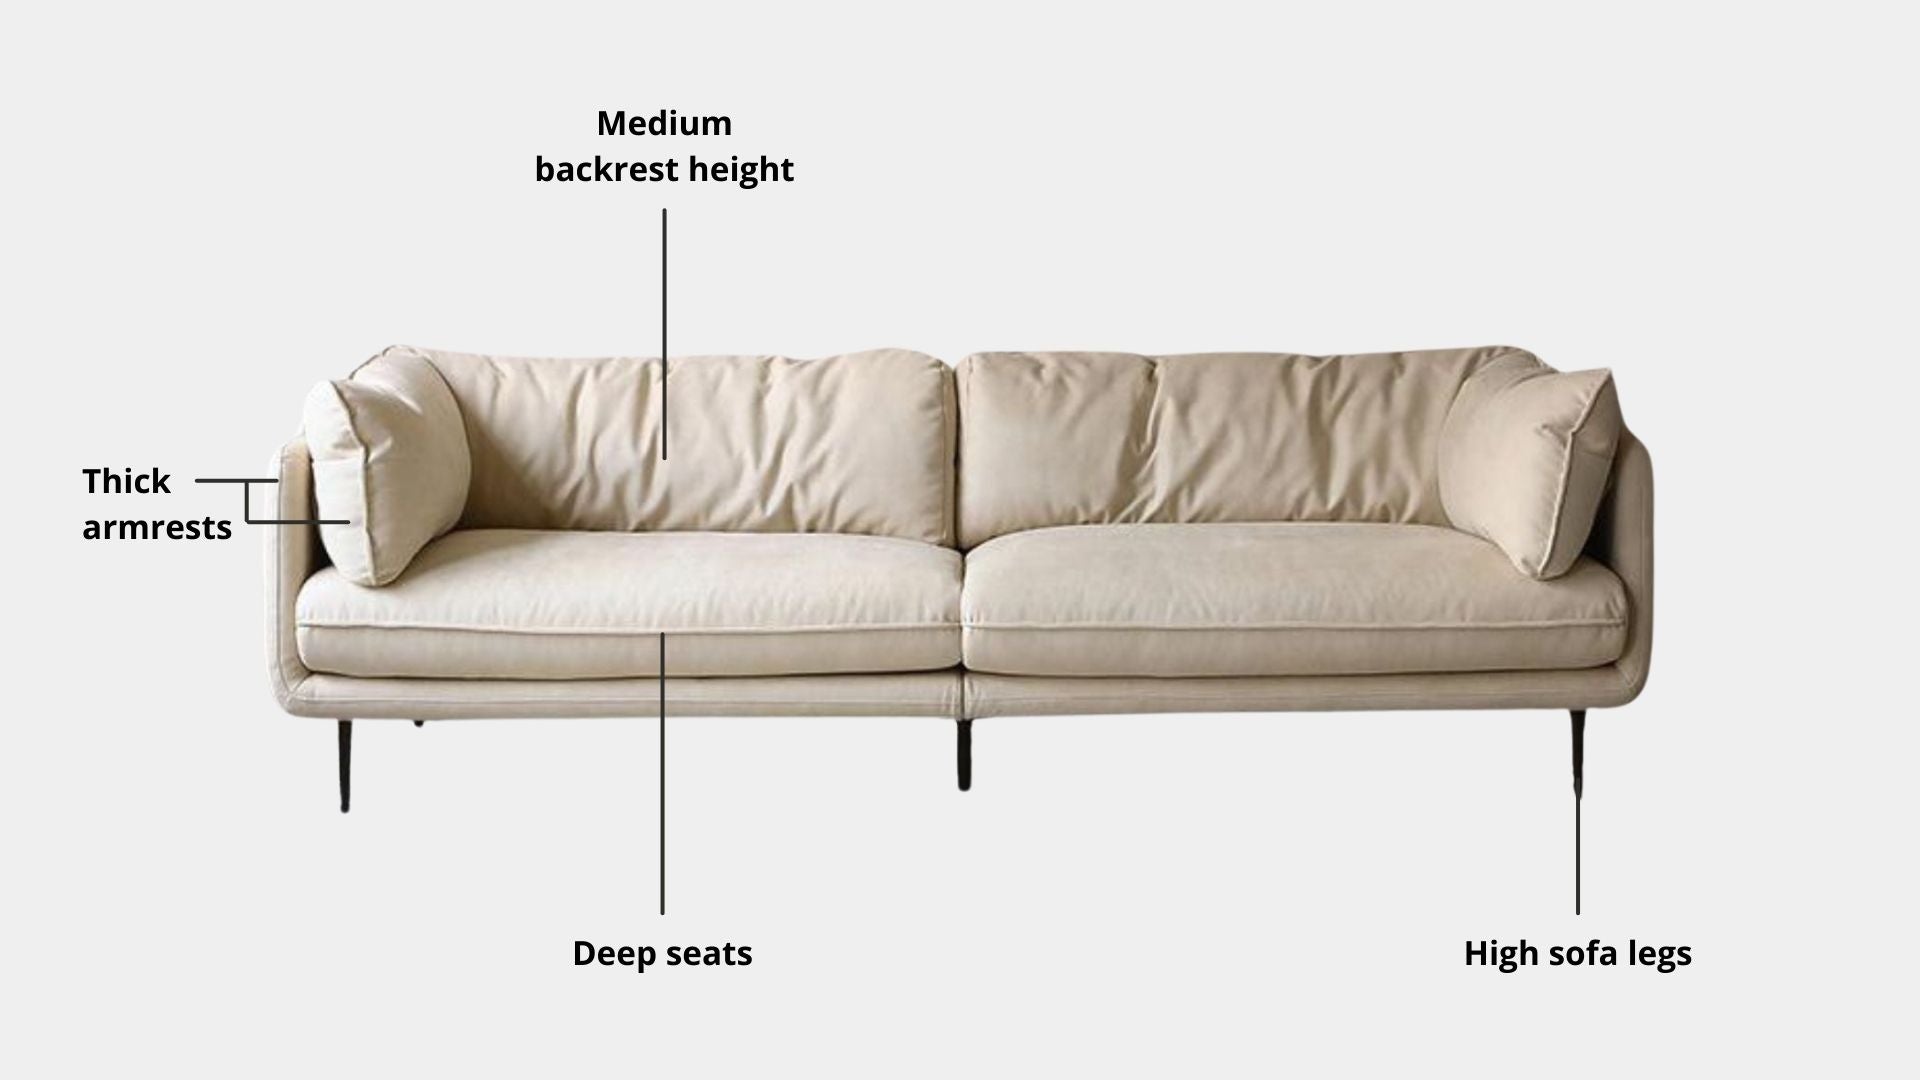 Key features such as armrest thickness, cushion height, seat depth and sofa leg height for Cuddle Fabric Sofa